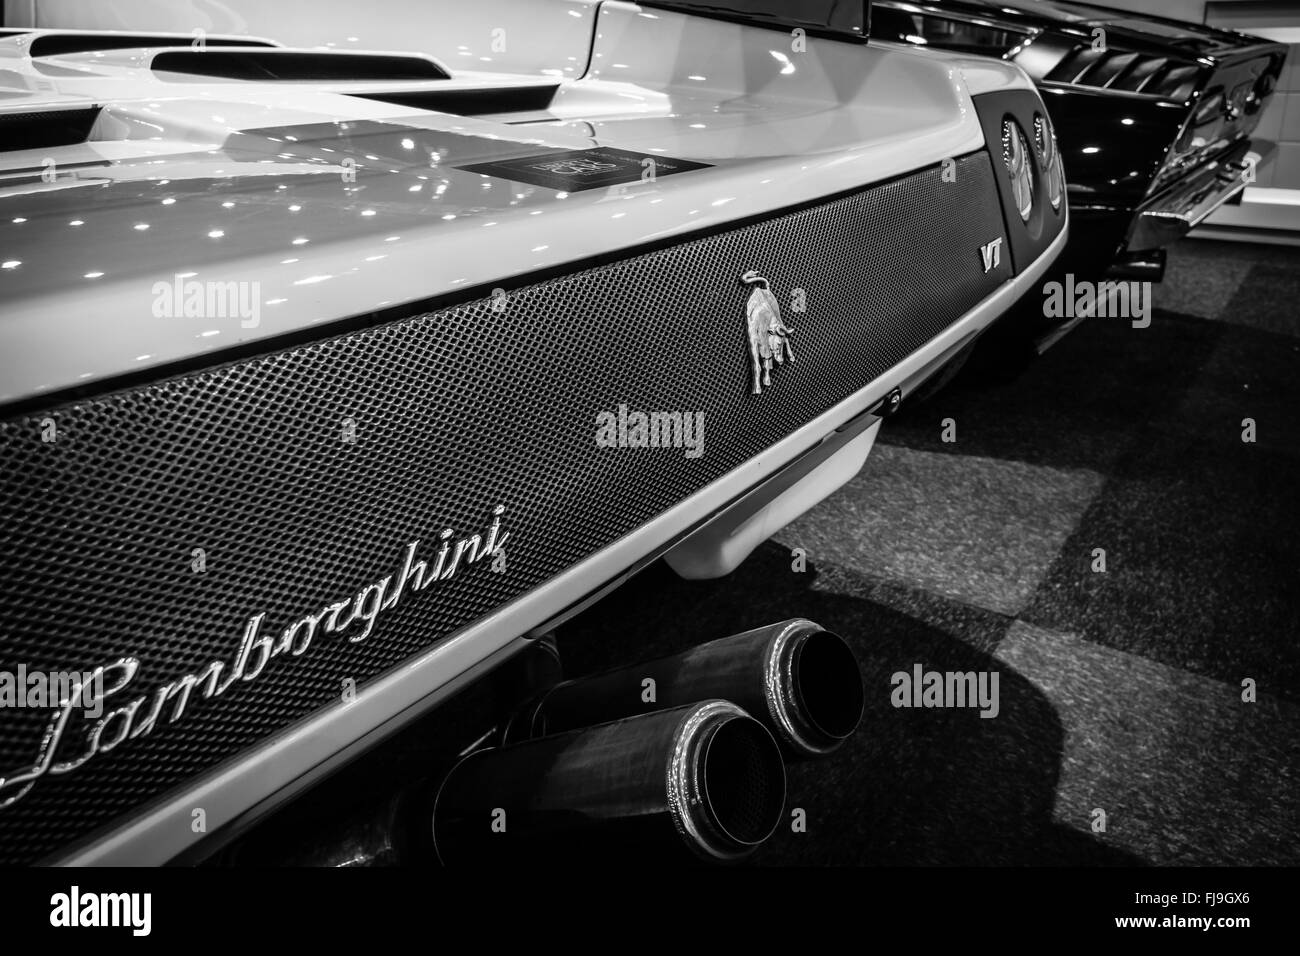 Fragment of a high-performance mid-engined sports car Lamborghini Diablo VT 6.0, 2000. Black and white Stock Photo